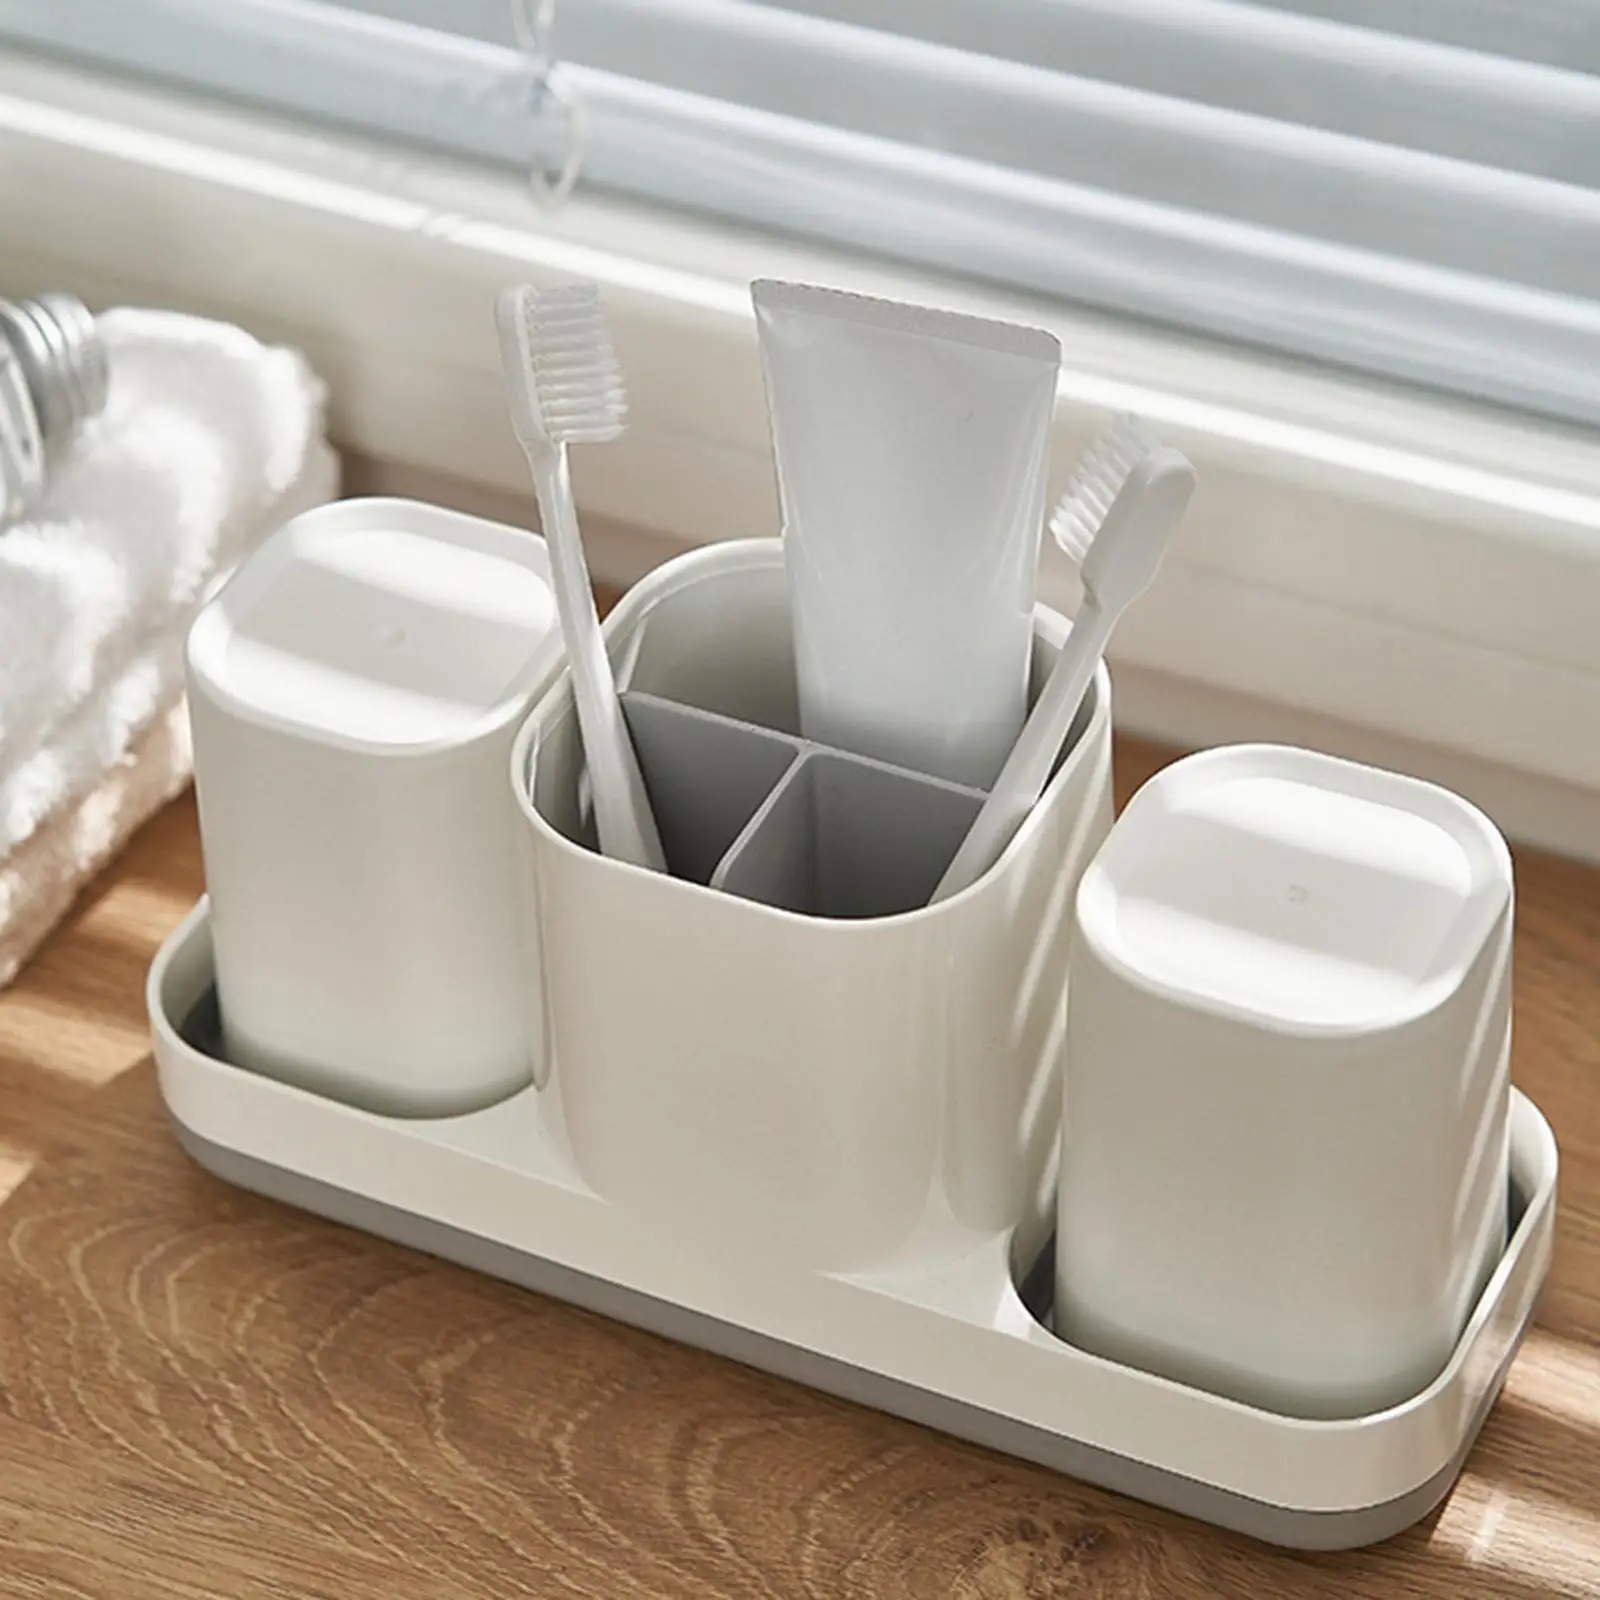 Bthroom Toothbrush Holder nd Grgle Cup Non Slip Bottom Cddy Countertop Lrge Dringe Try Skin Cre Bottle for Couple Kids